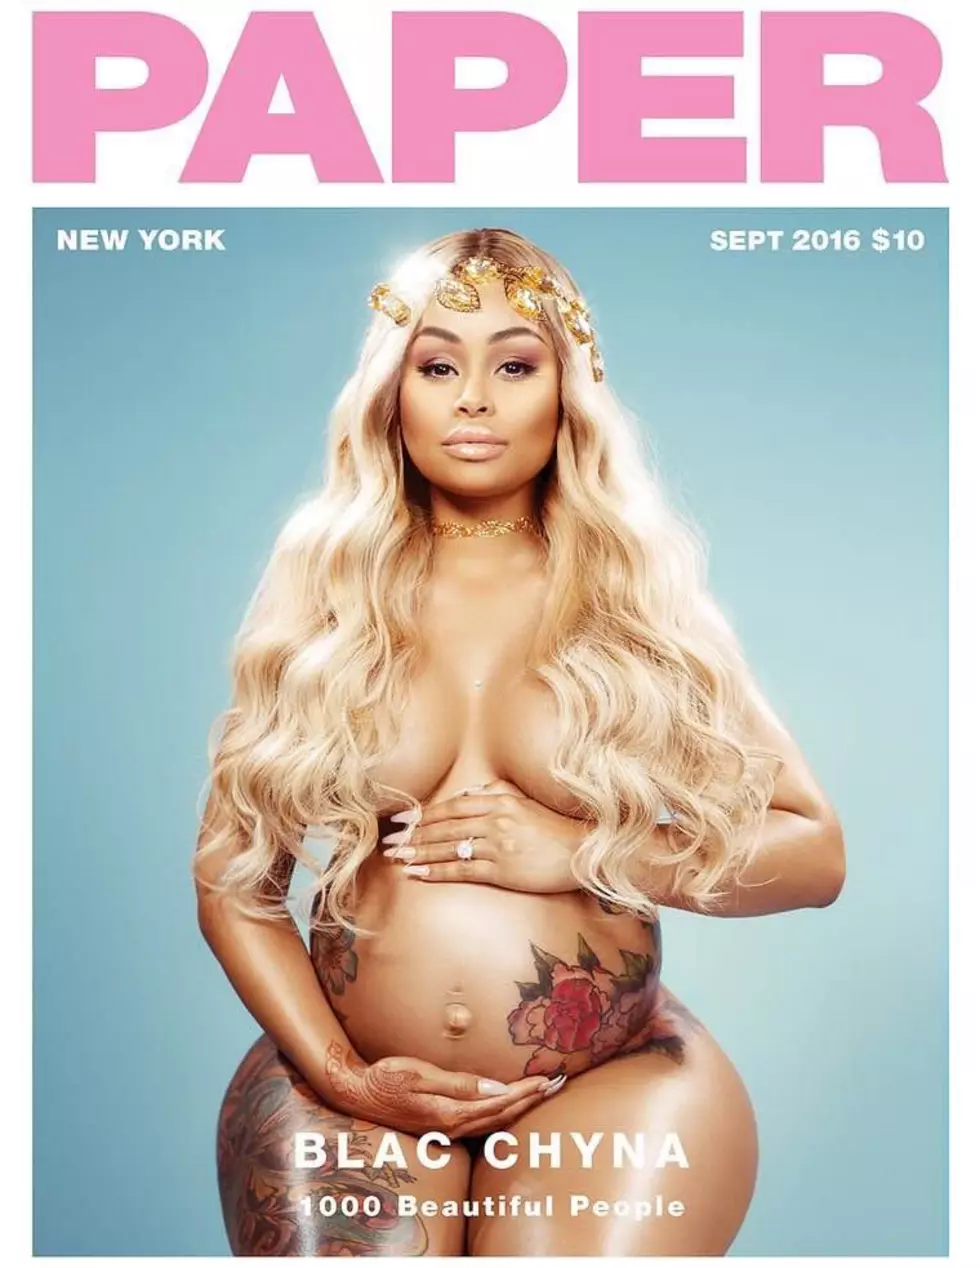 &#8216;A Mother and a Badass B&#8212;-:&#8217; Blac Chyna Goes Topless on the Cover of &#8216;PAPER&#8217; [PHOTOS]